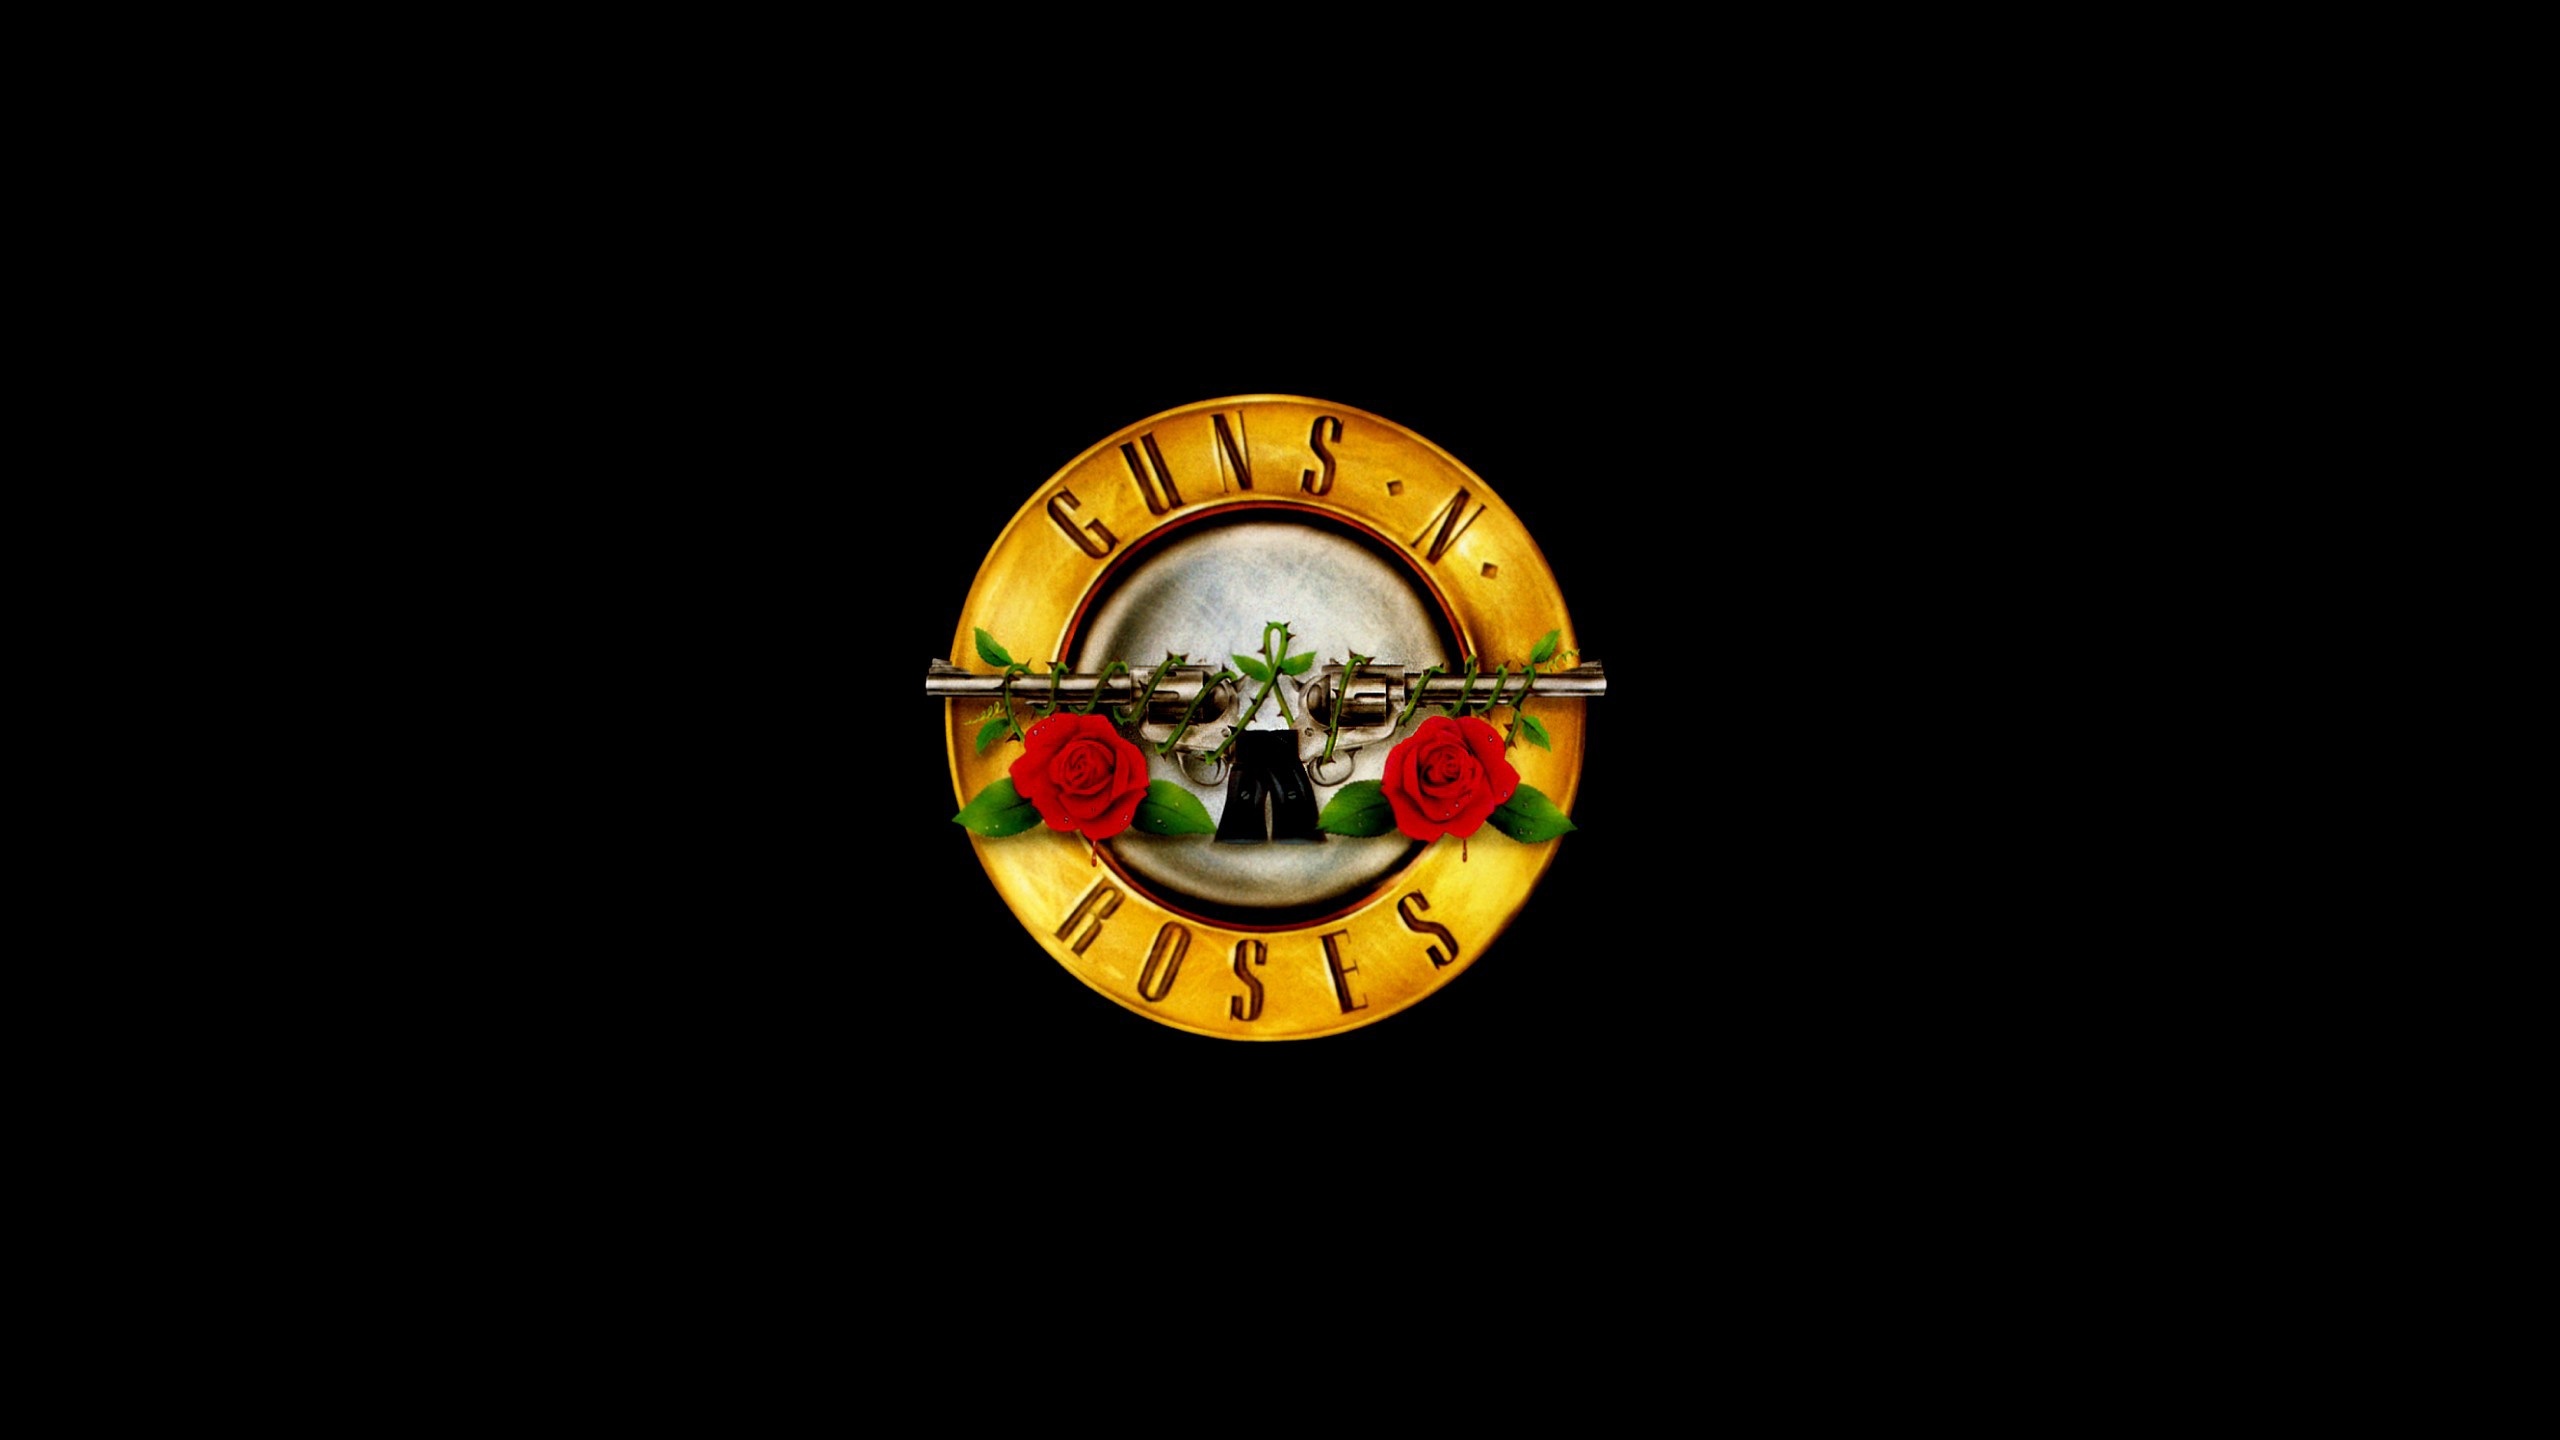 36 Guns N' Roses HD Wallpapers | Backgrounds - Wallpaper Abyss